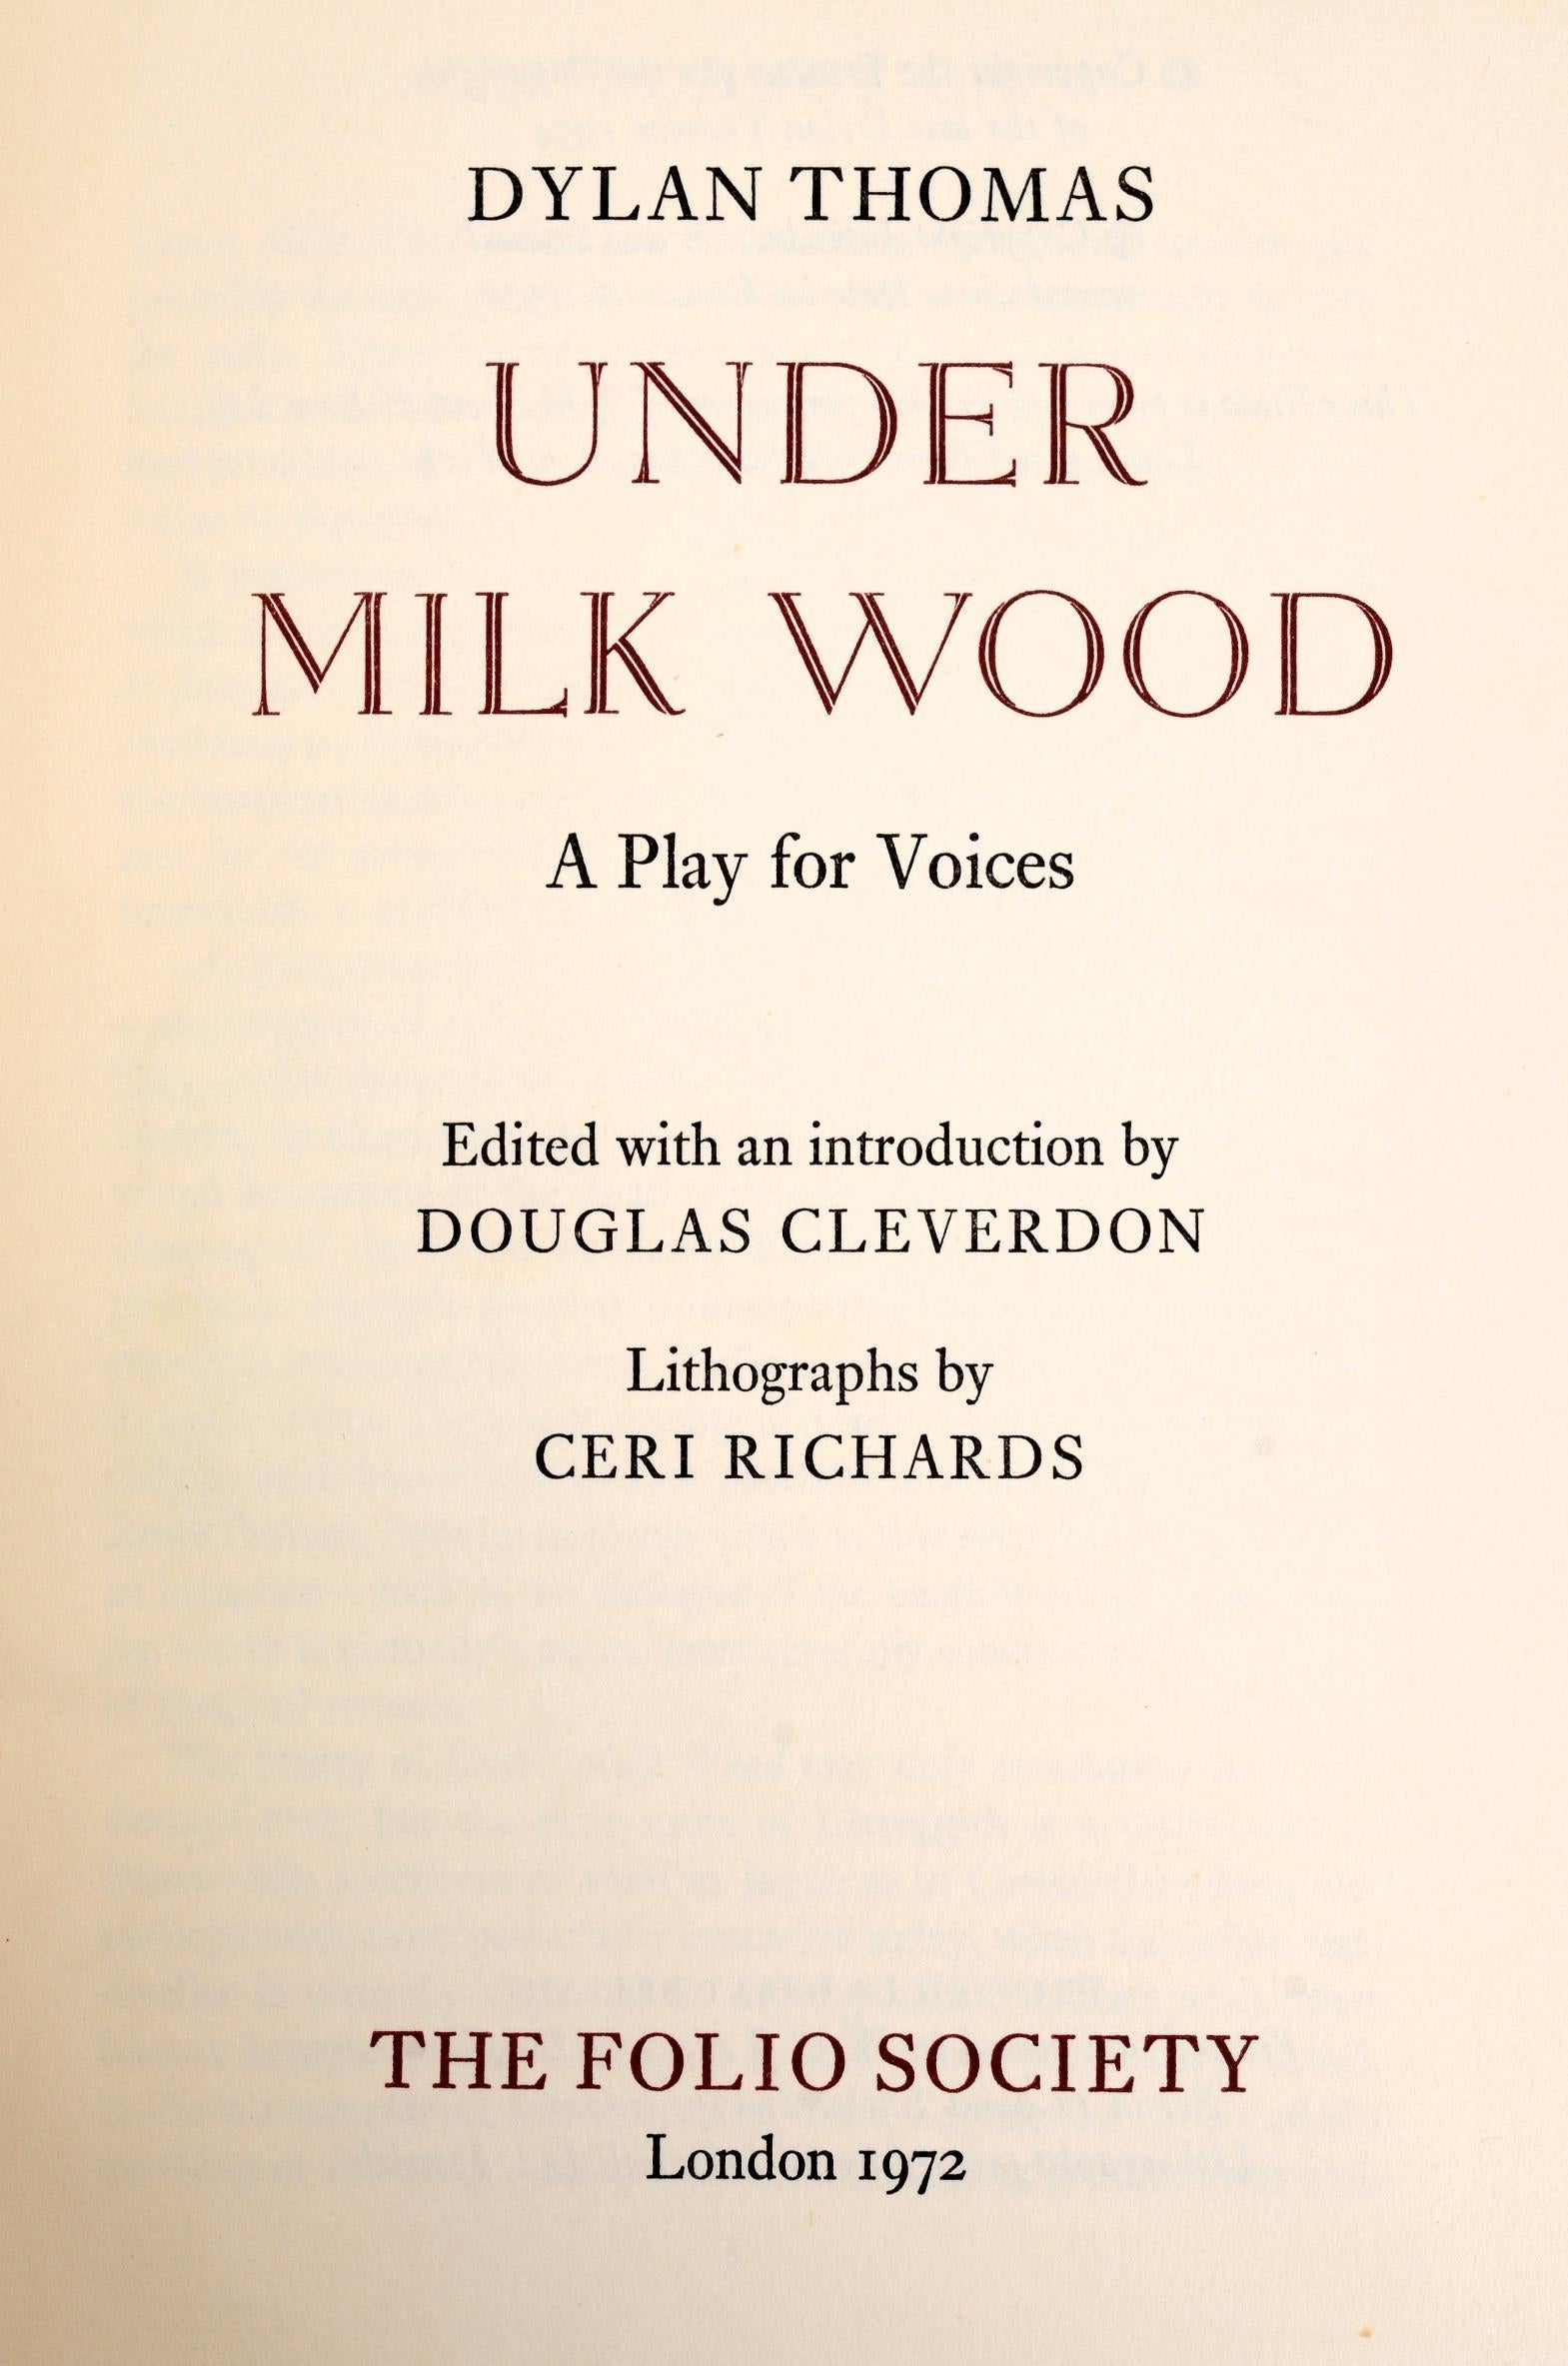 Under milk wood by Dylan Thomas, A Play for Voices. The Folio Society, London, 1972. 1st Edition Thus hardcover with slipcase. 